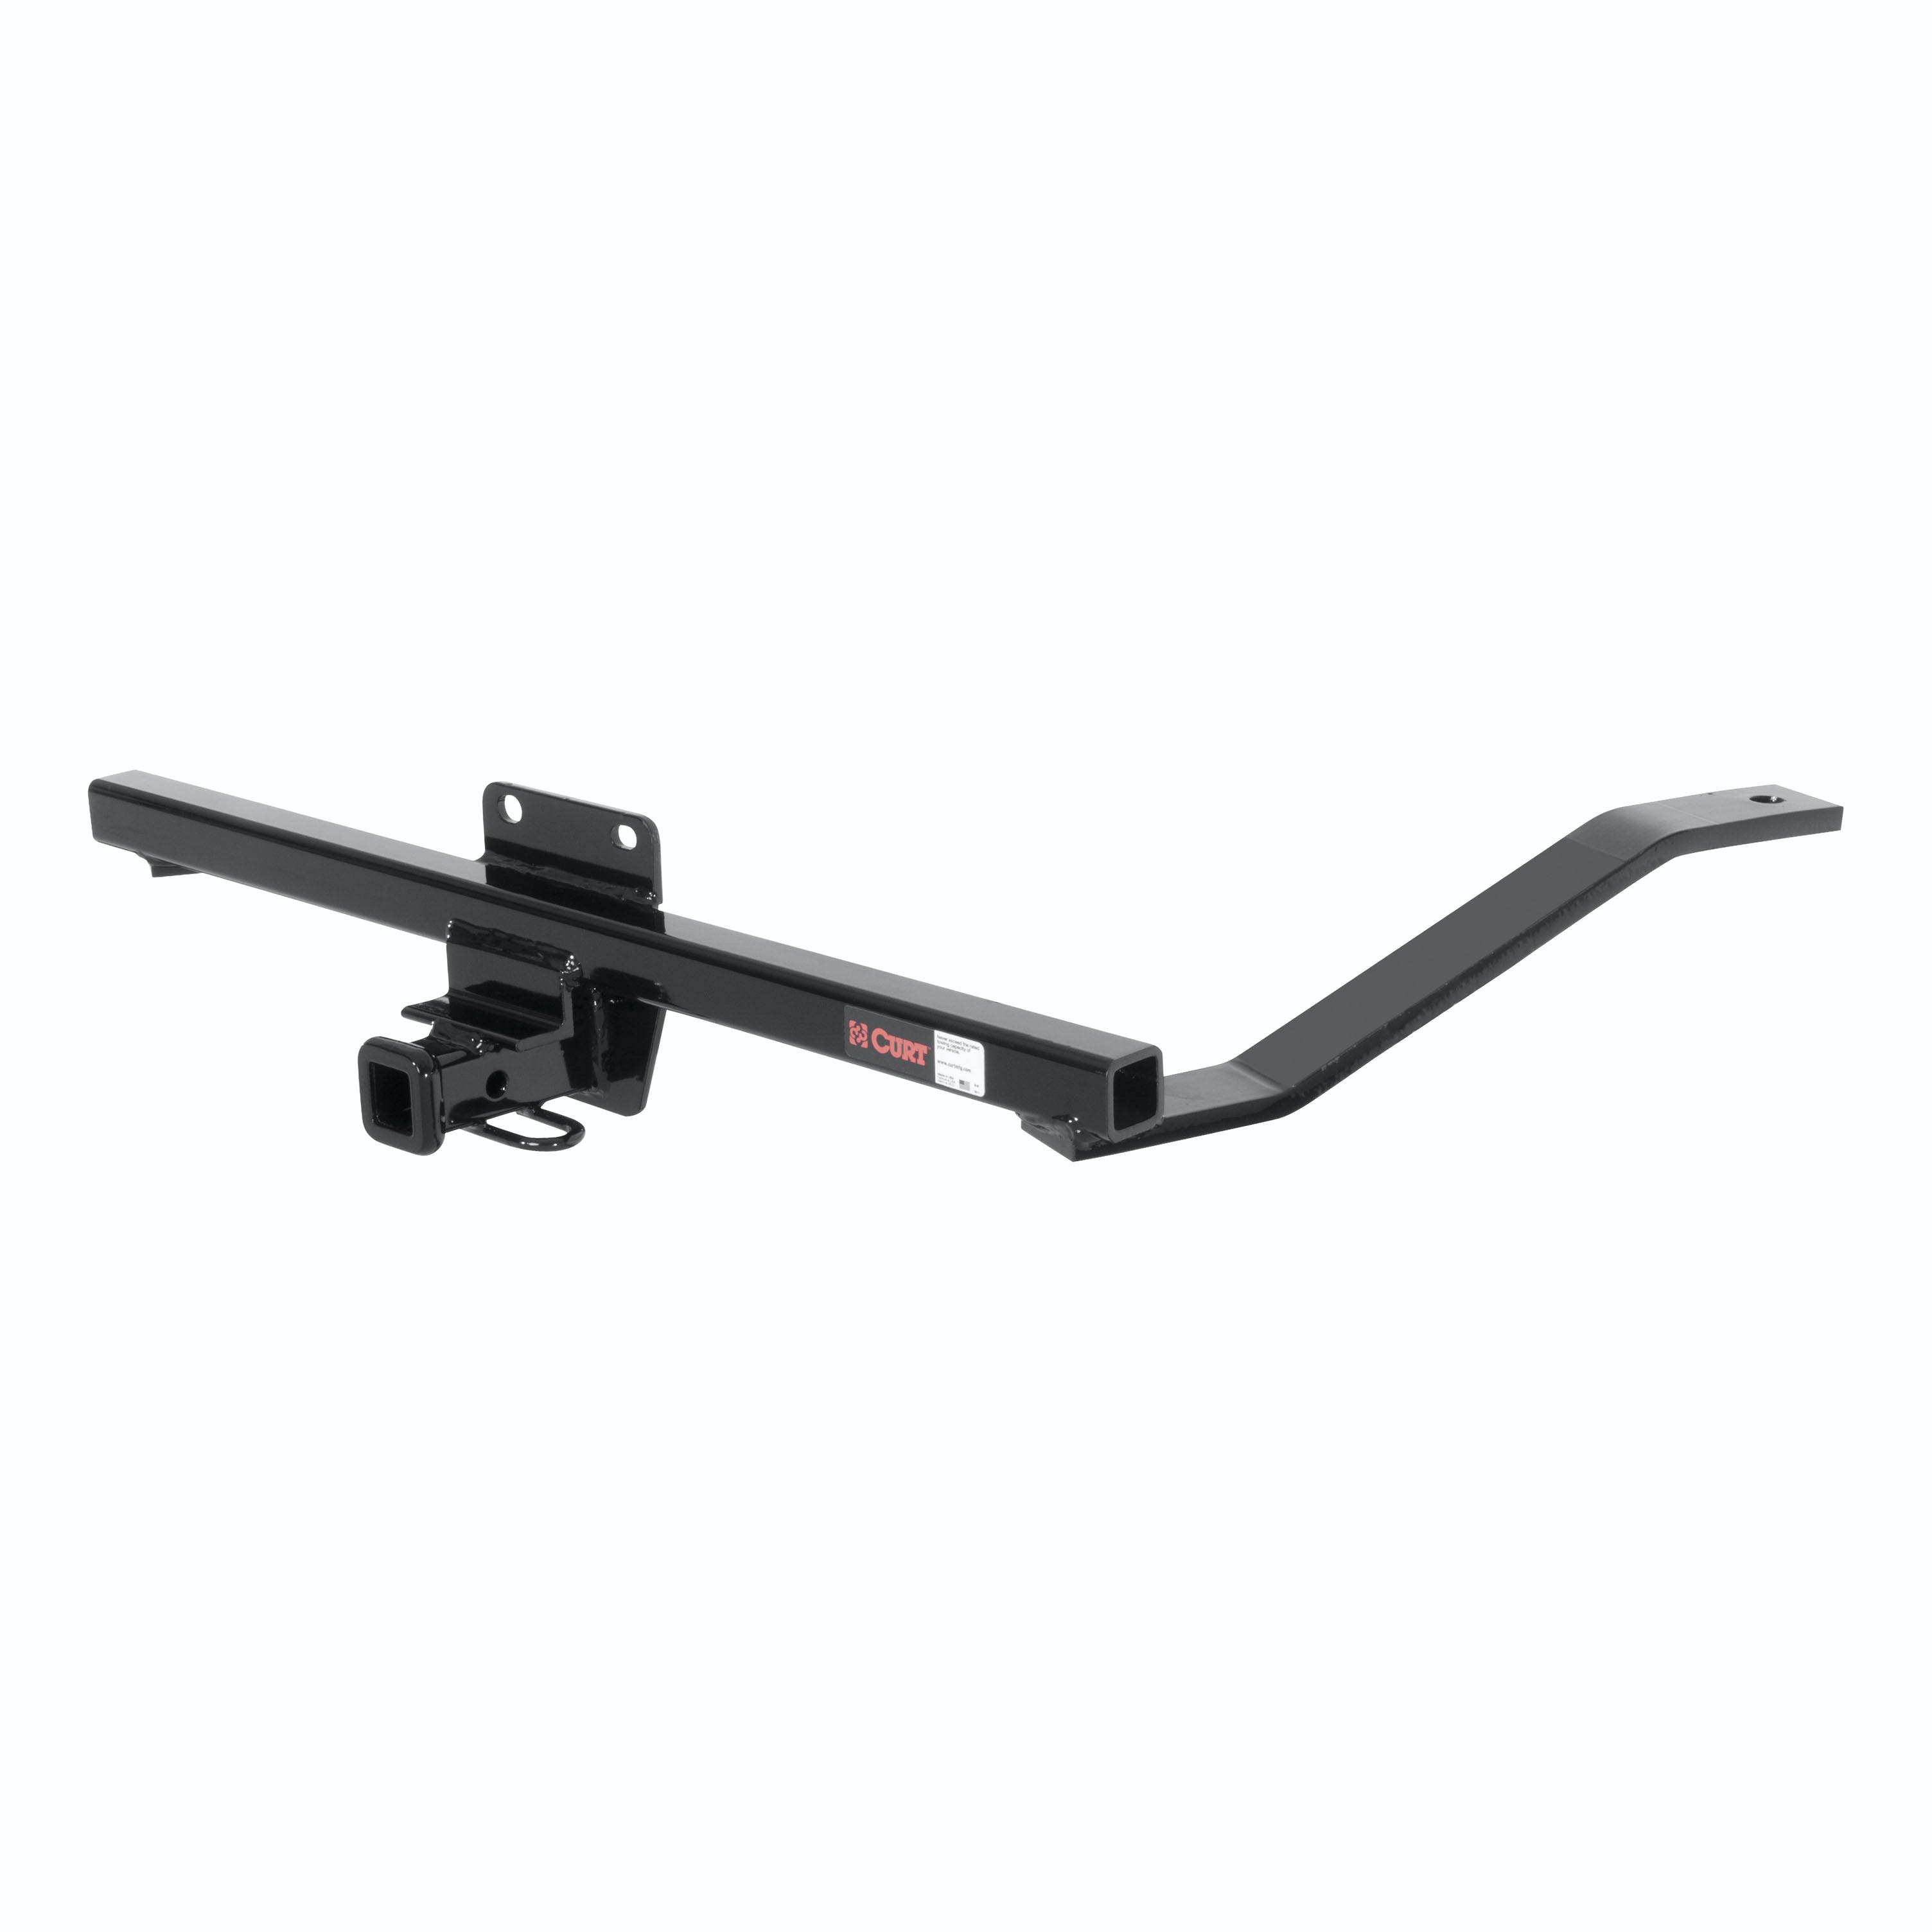 CURT 11326 Class 1 Trailer Hitch, 1-1/4 Receiver, Select Saab 9-3